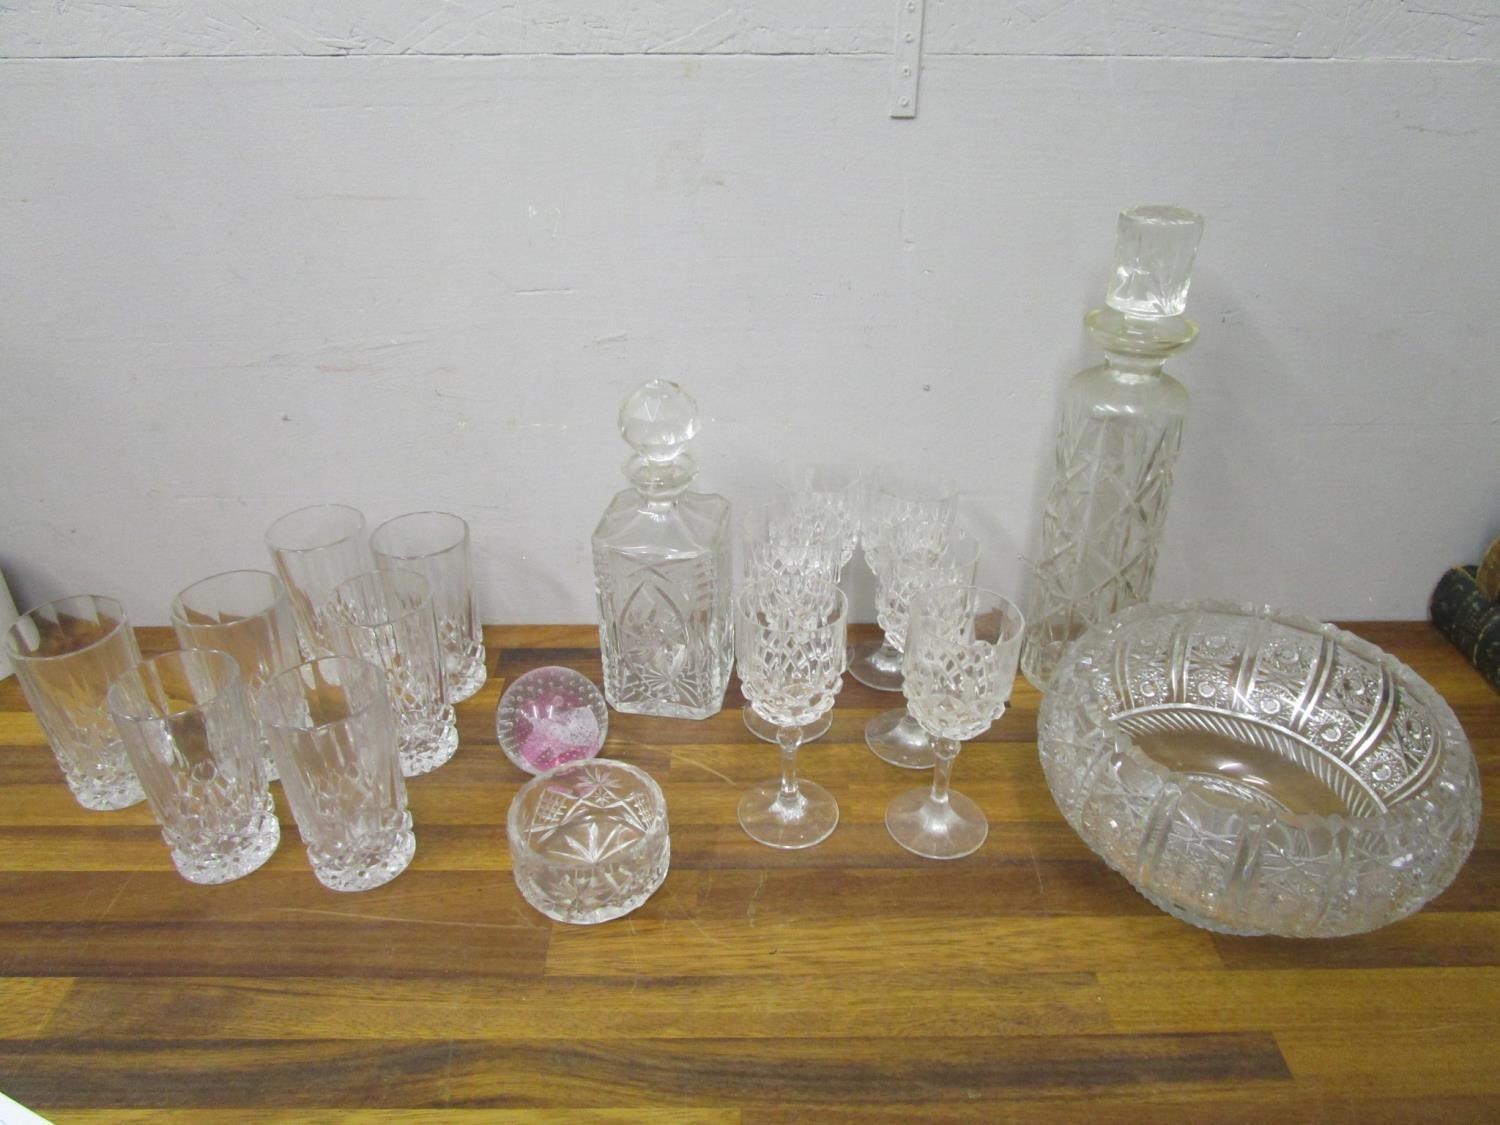 Glassware to include a set of six wines, two decanters, a bowl and other items